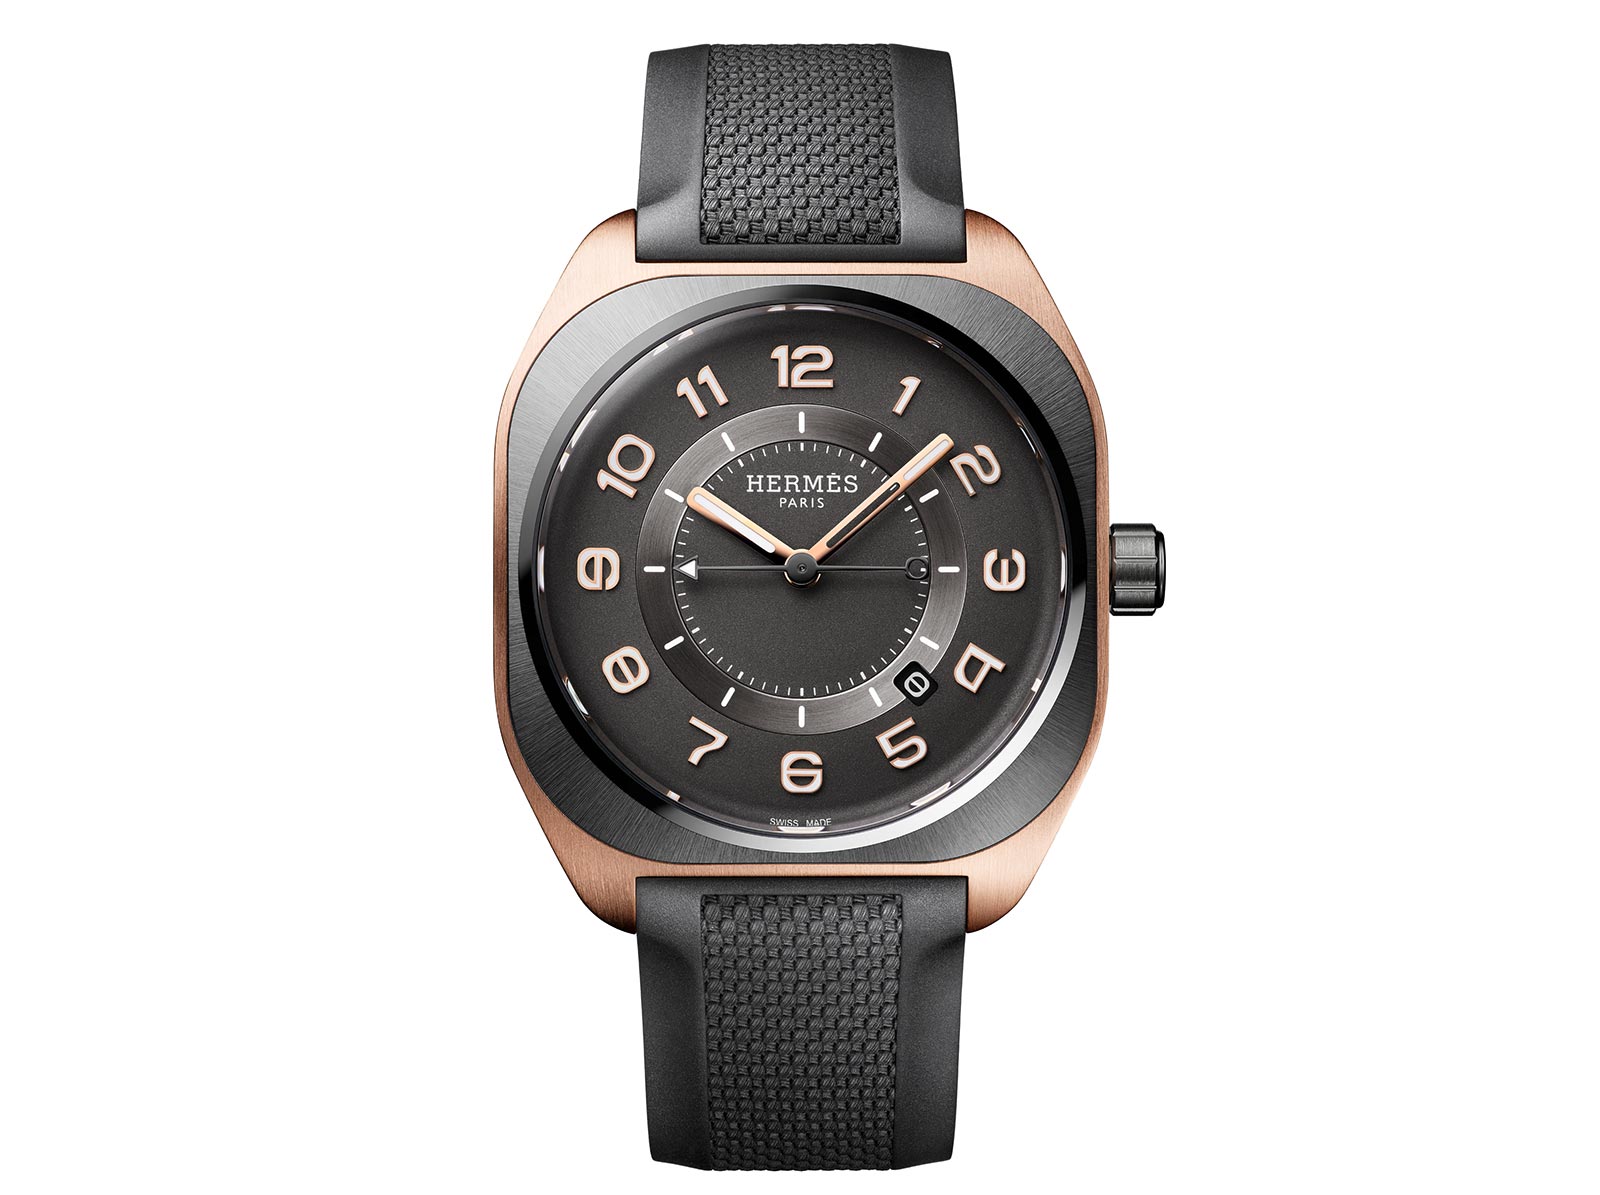 Hermès - H08 in rose gold and black-DLC titanium, Time and Watches